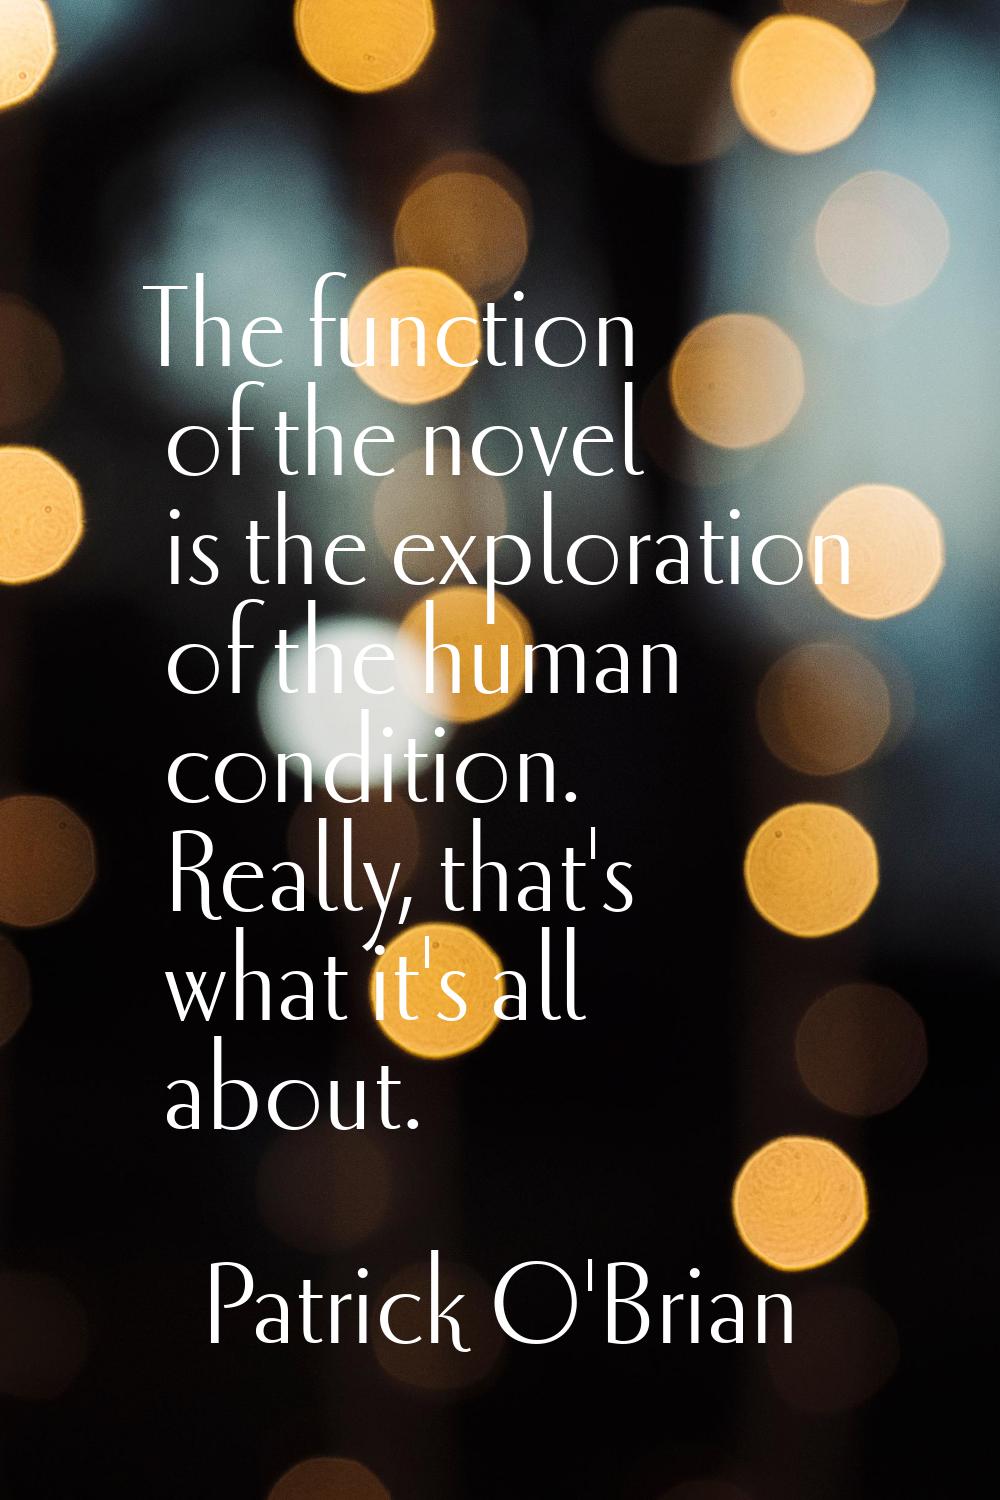 The function of the novel is the exploration of the human condition. Really, that's what it's all a